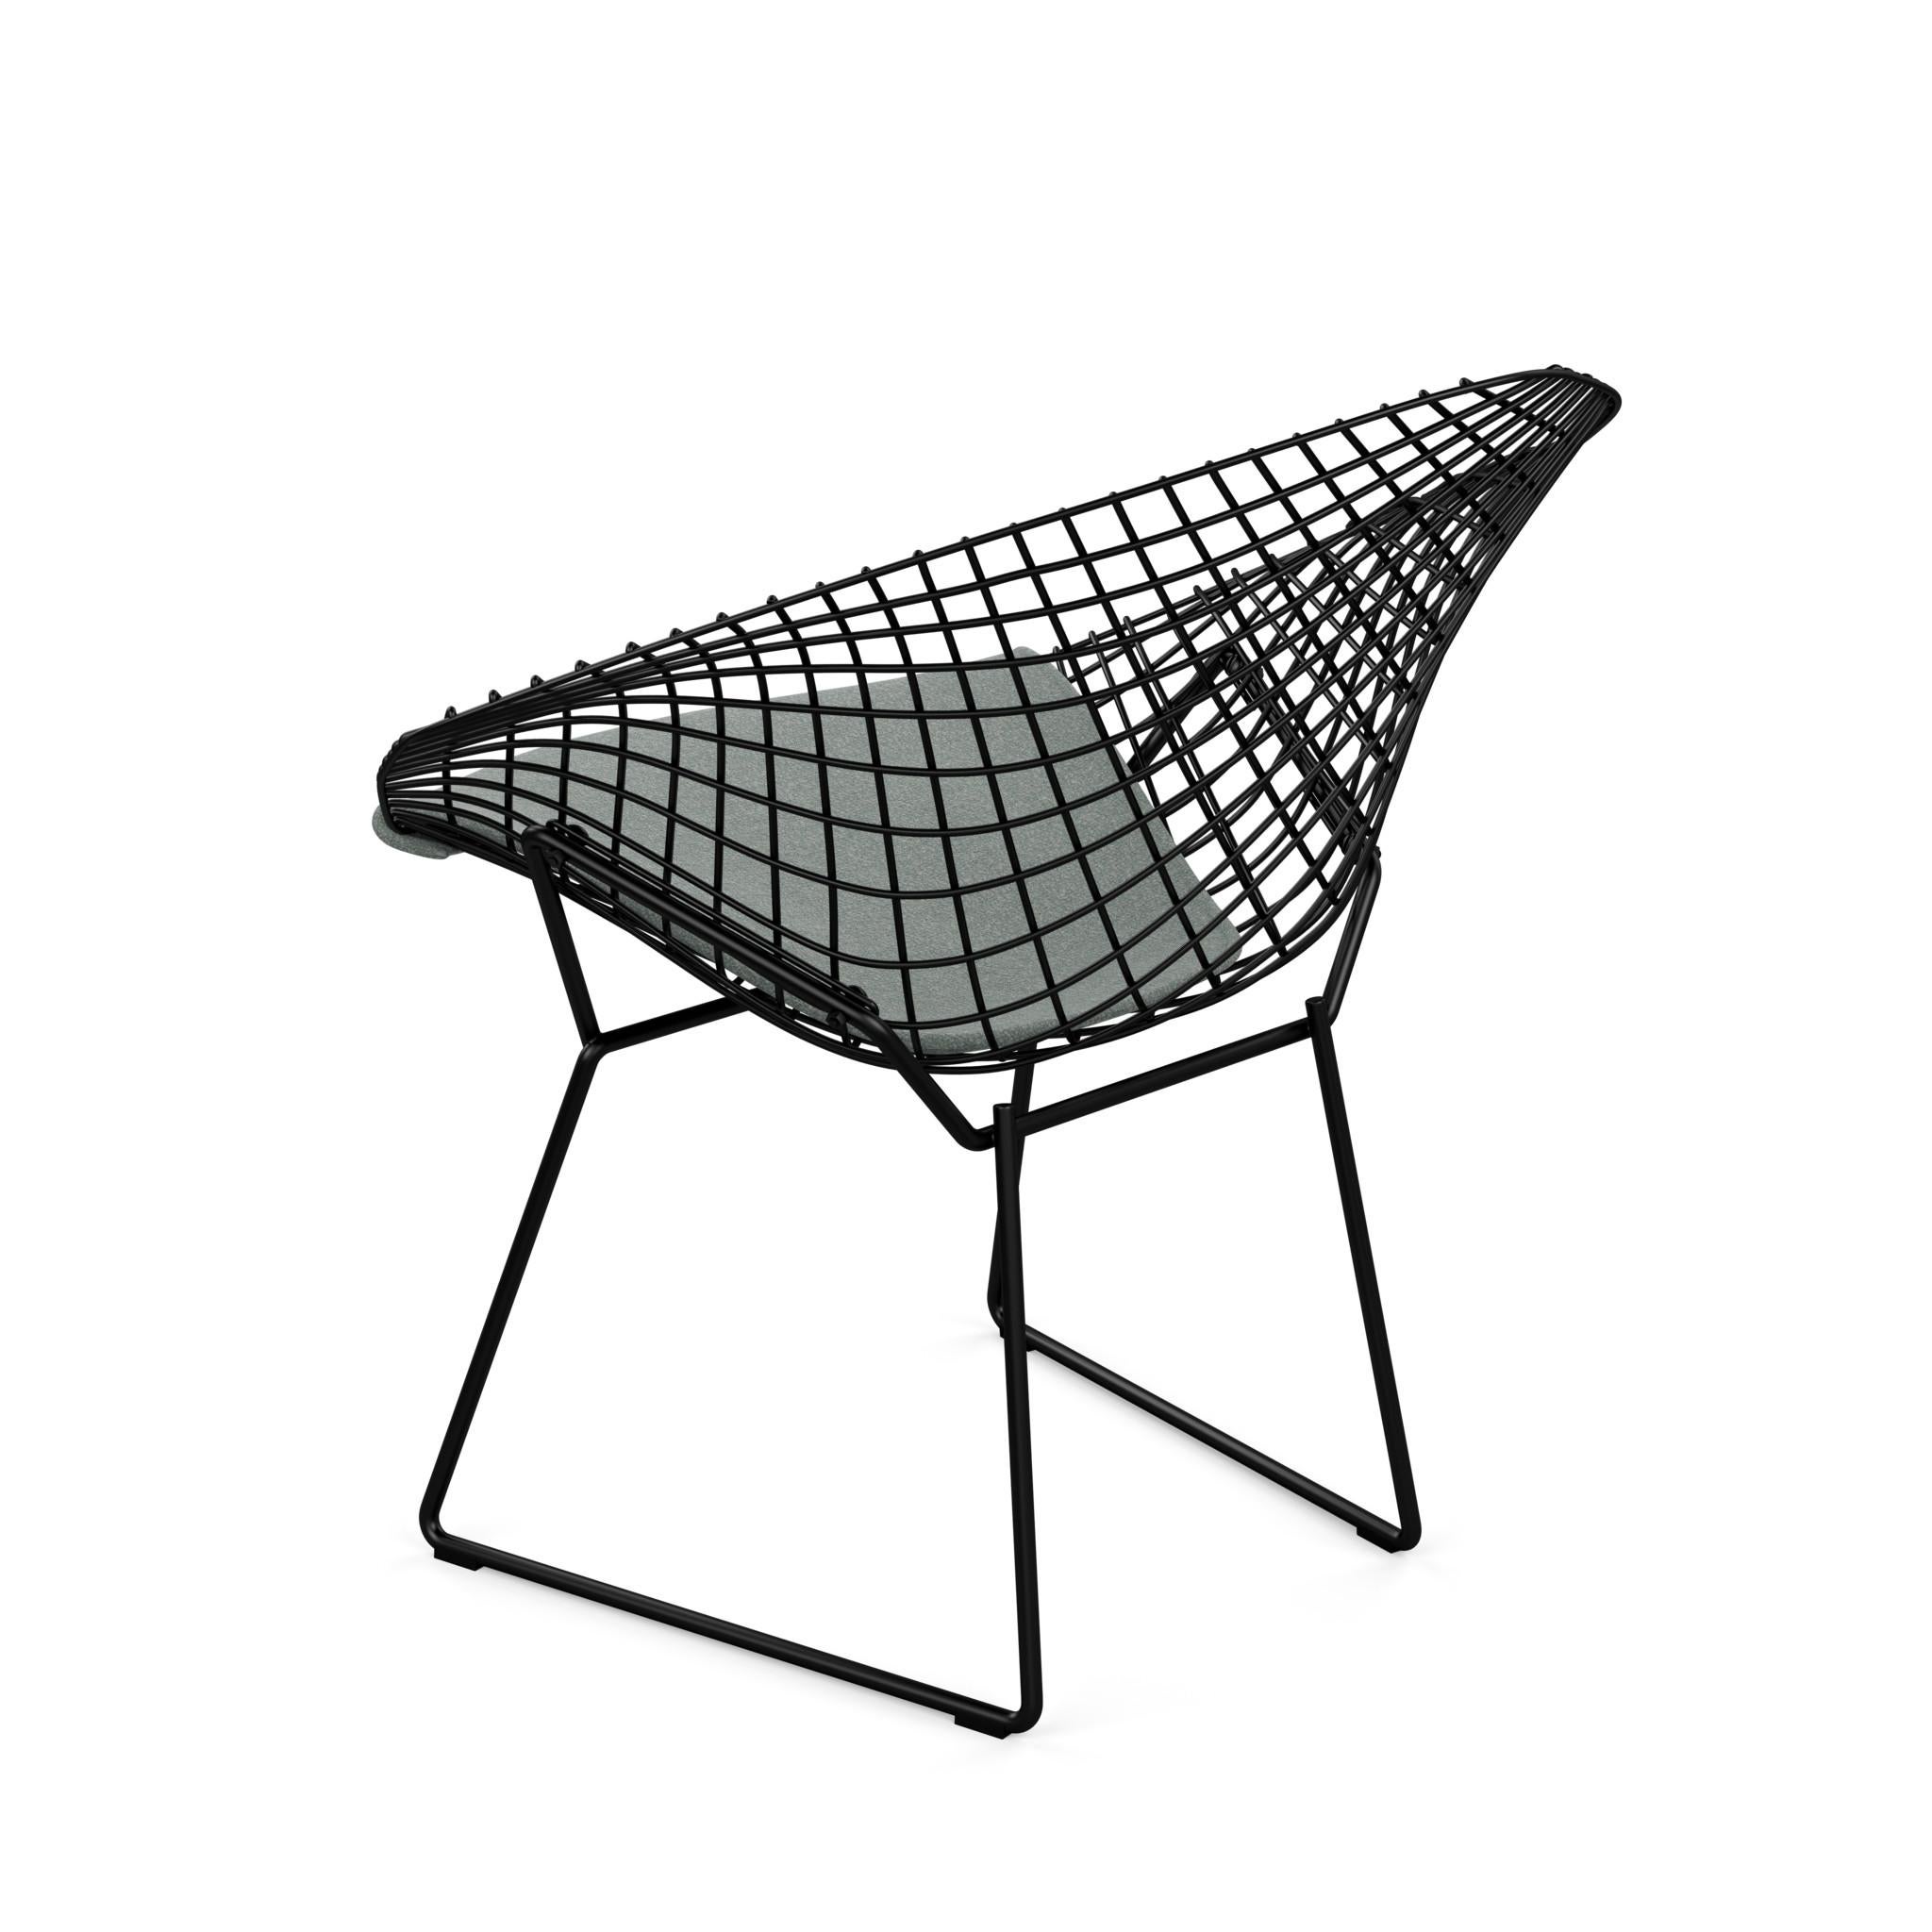 The Diamond Chair is an astounding study in space, form and function by one of the master sculptors of the last century. Harry Bertoia found sublime grace in an Industrial material, elevating it beyond its normal utility into a work of art. Harry